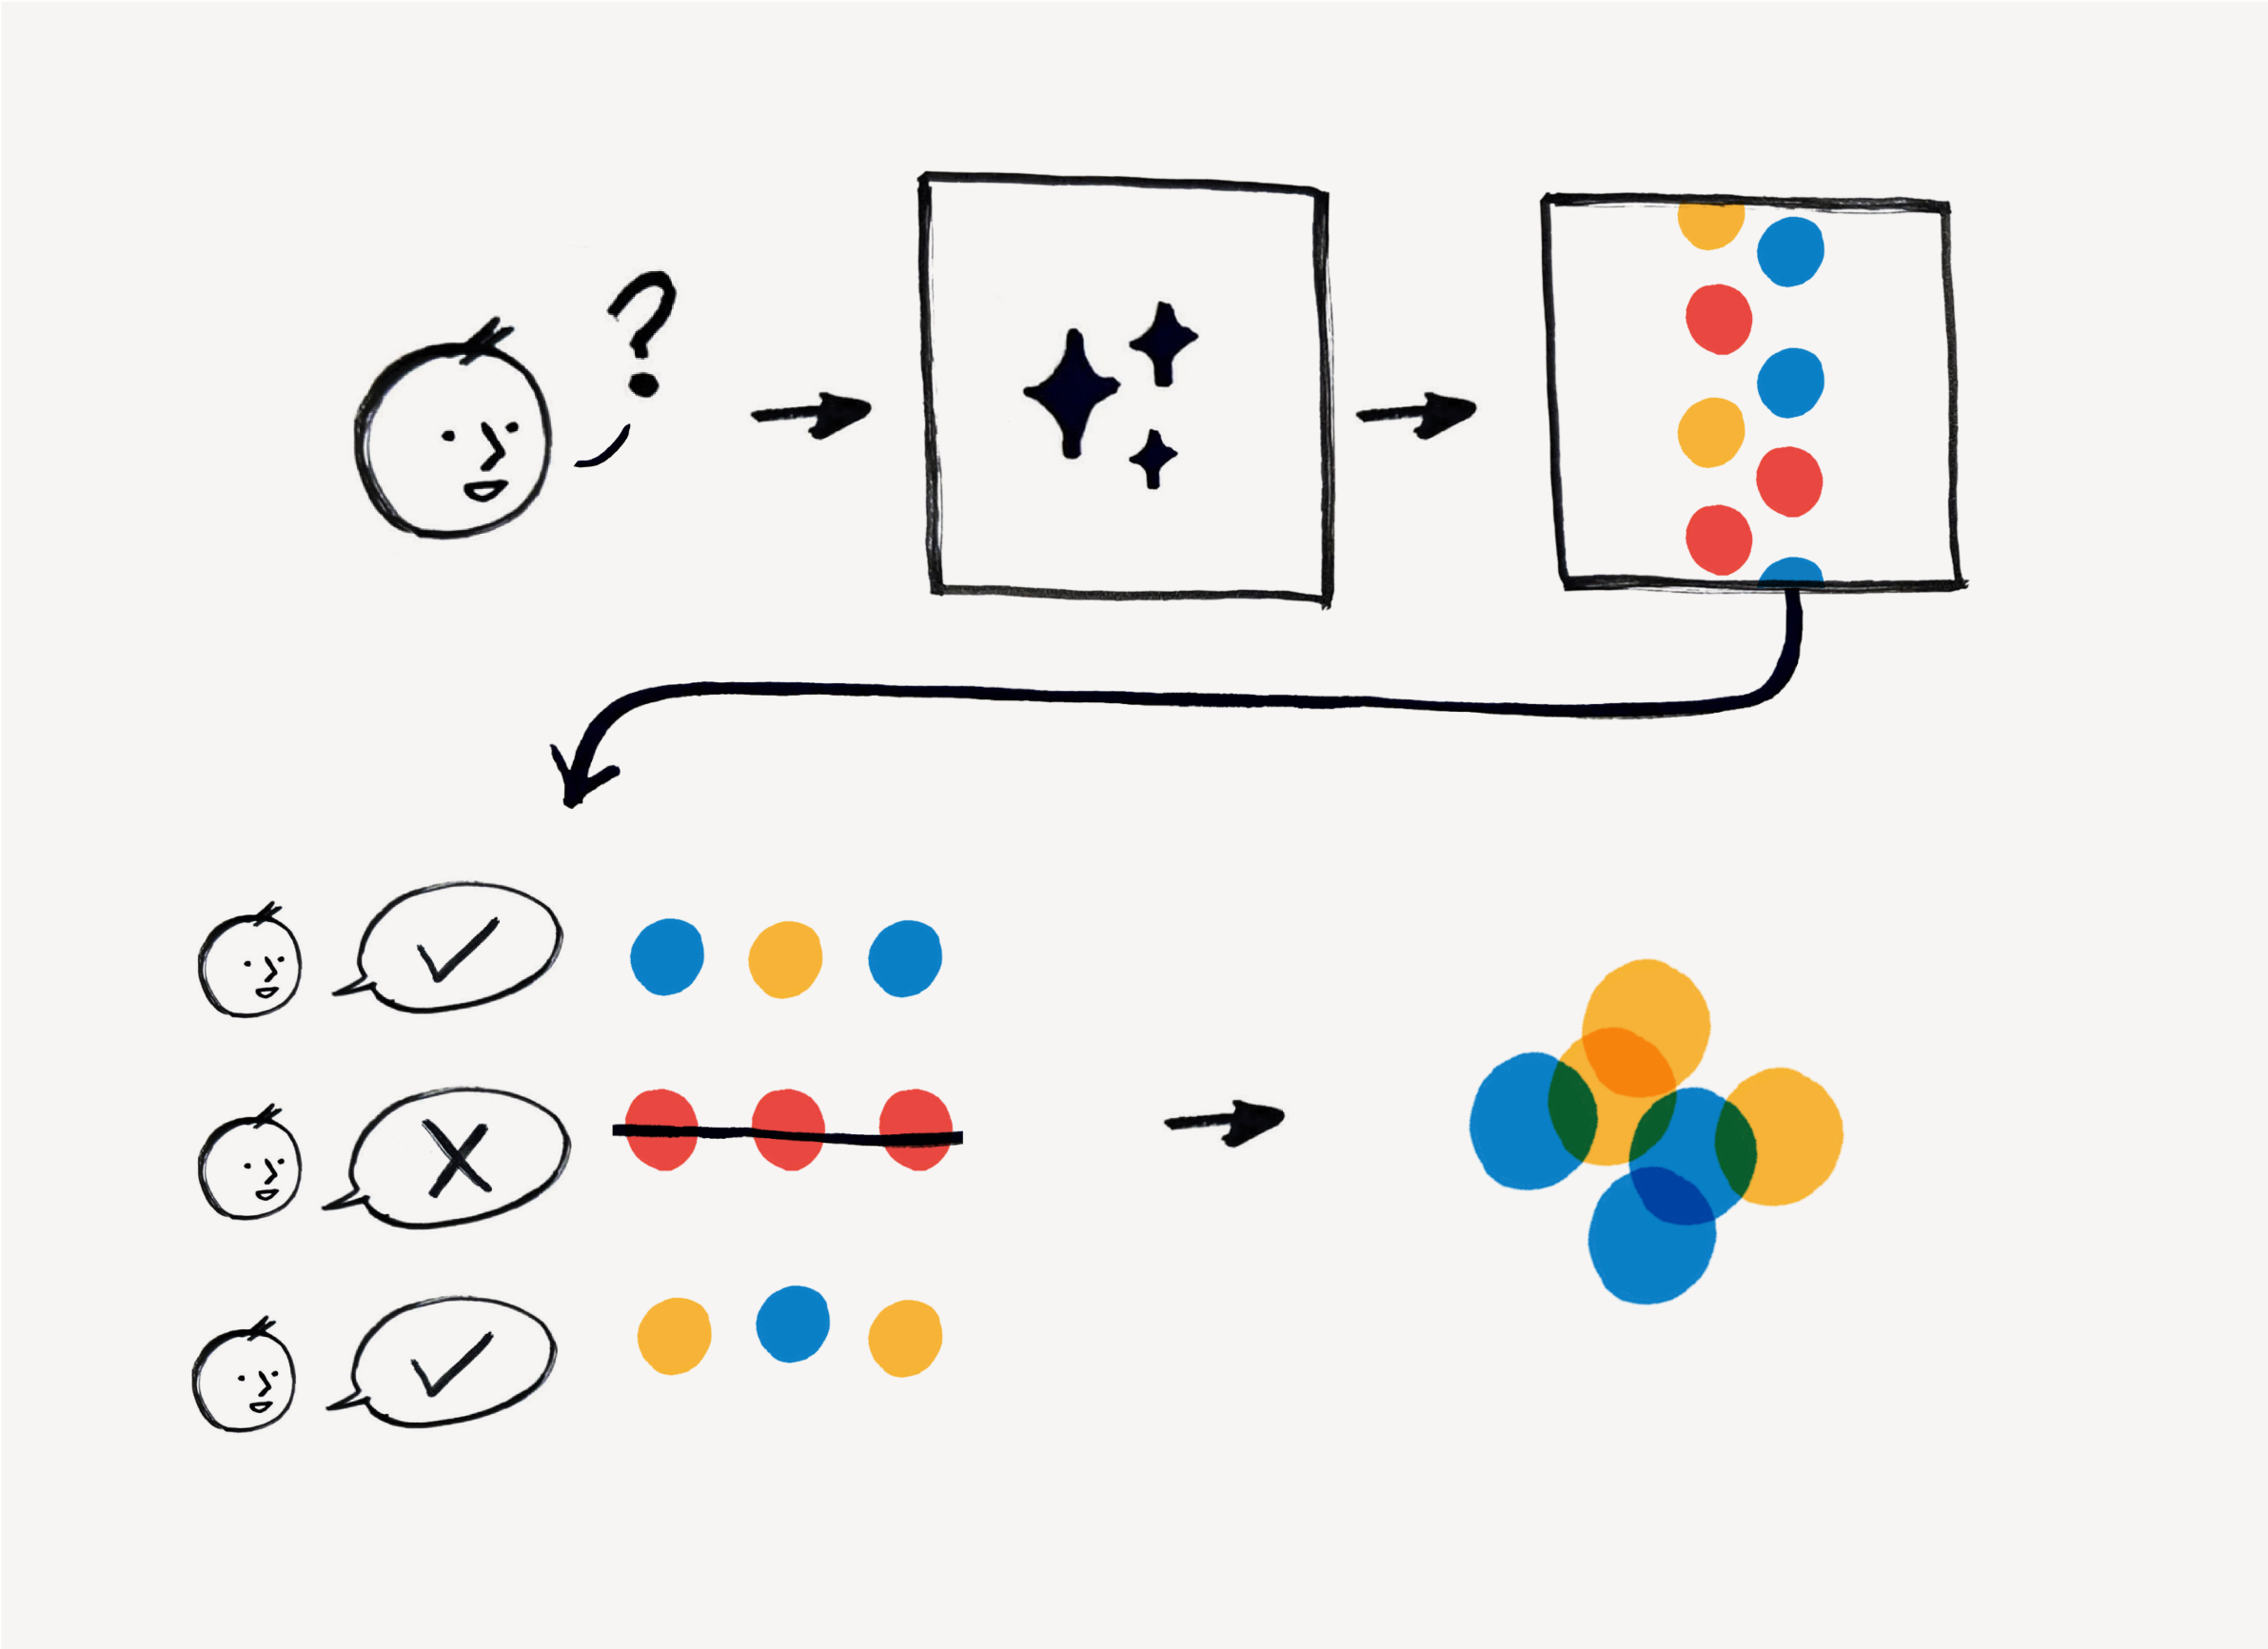 What if you could guide your model by choosing which sources it uses to construct a response?